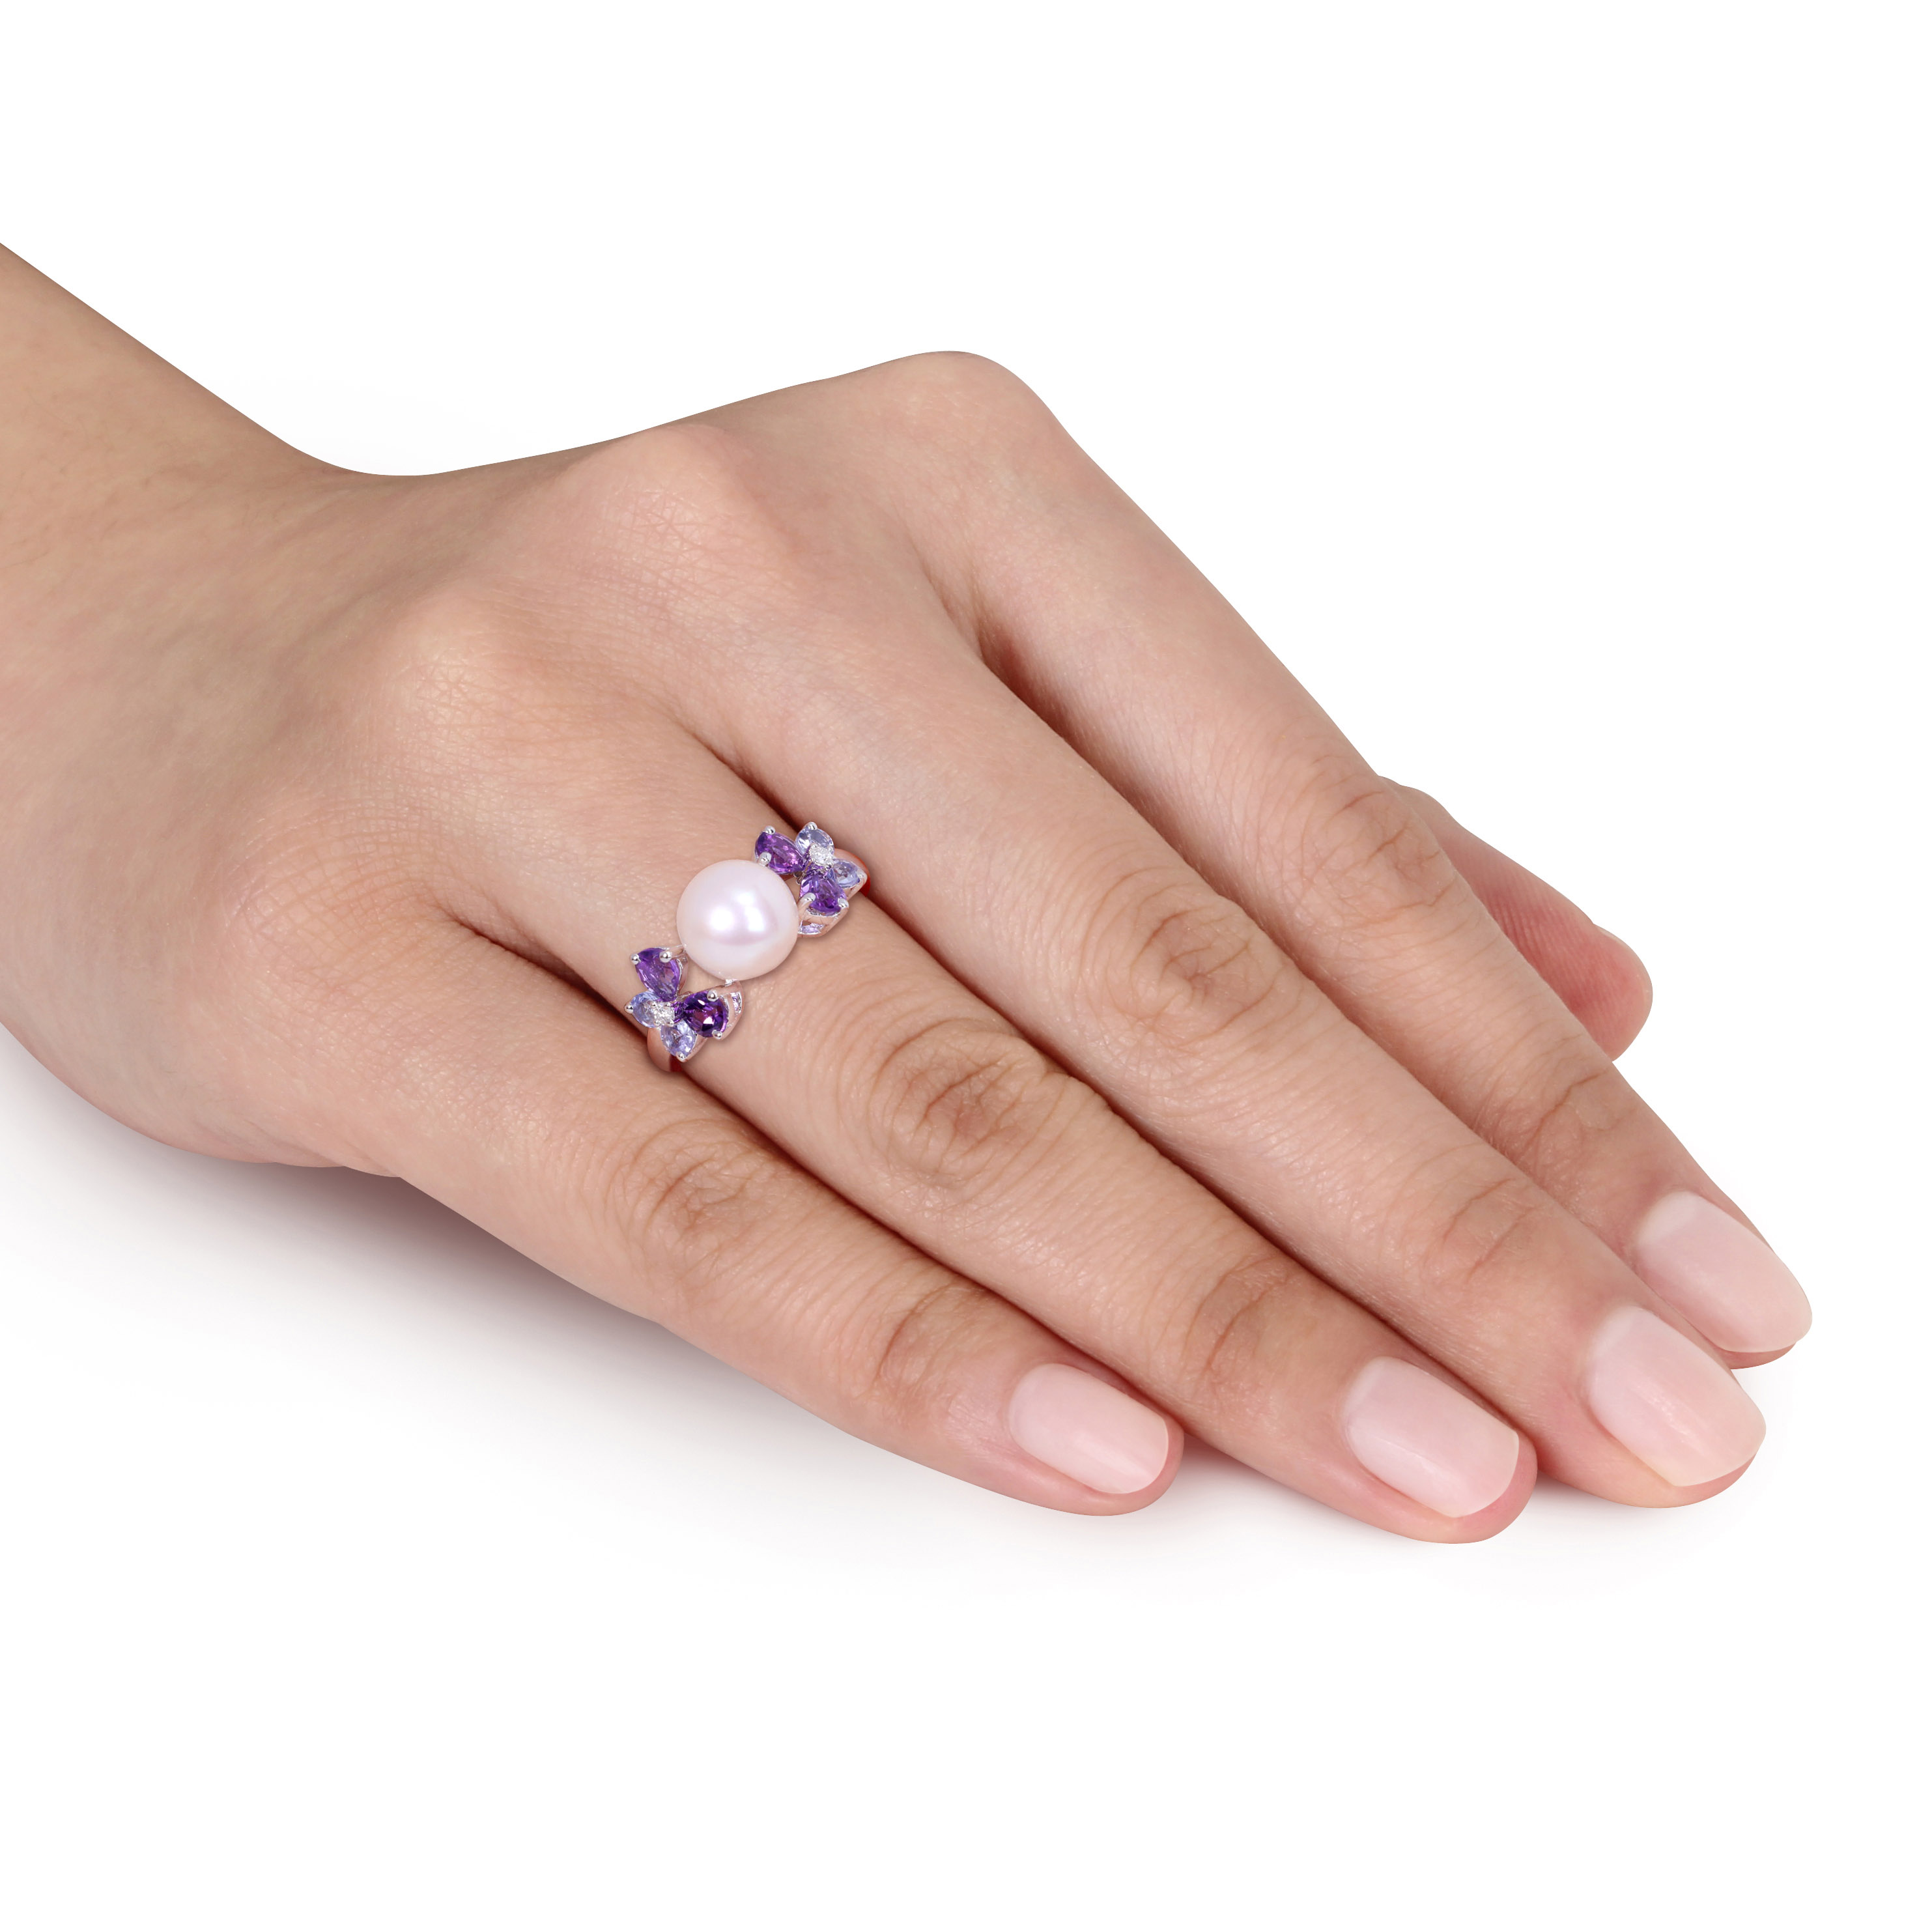 8 - 8.5 MM White Cultured Freshwater Pearl, Diamond, Tanzanite, and Amethyst Ring in Sterling Silver